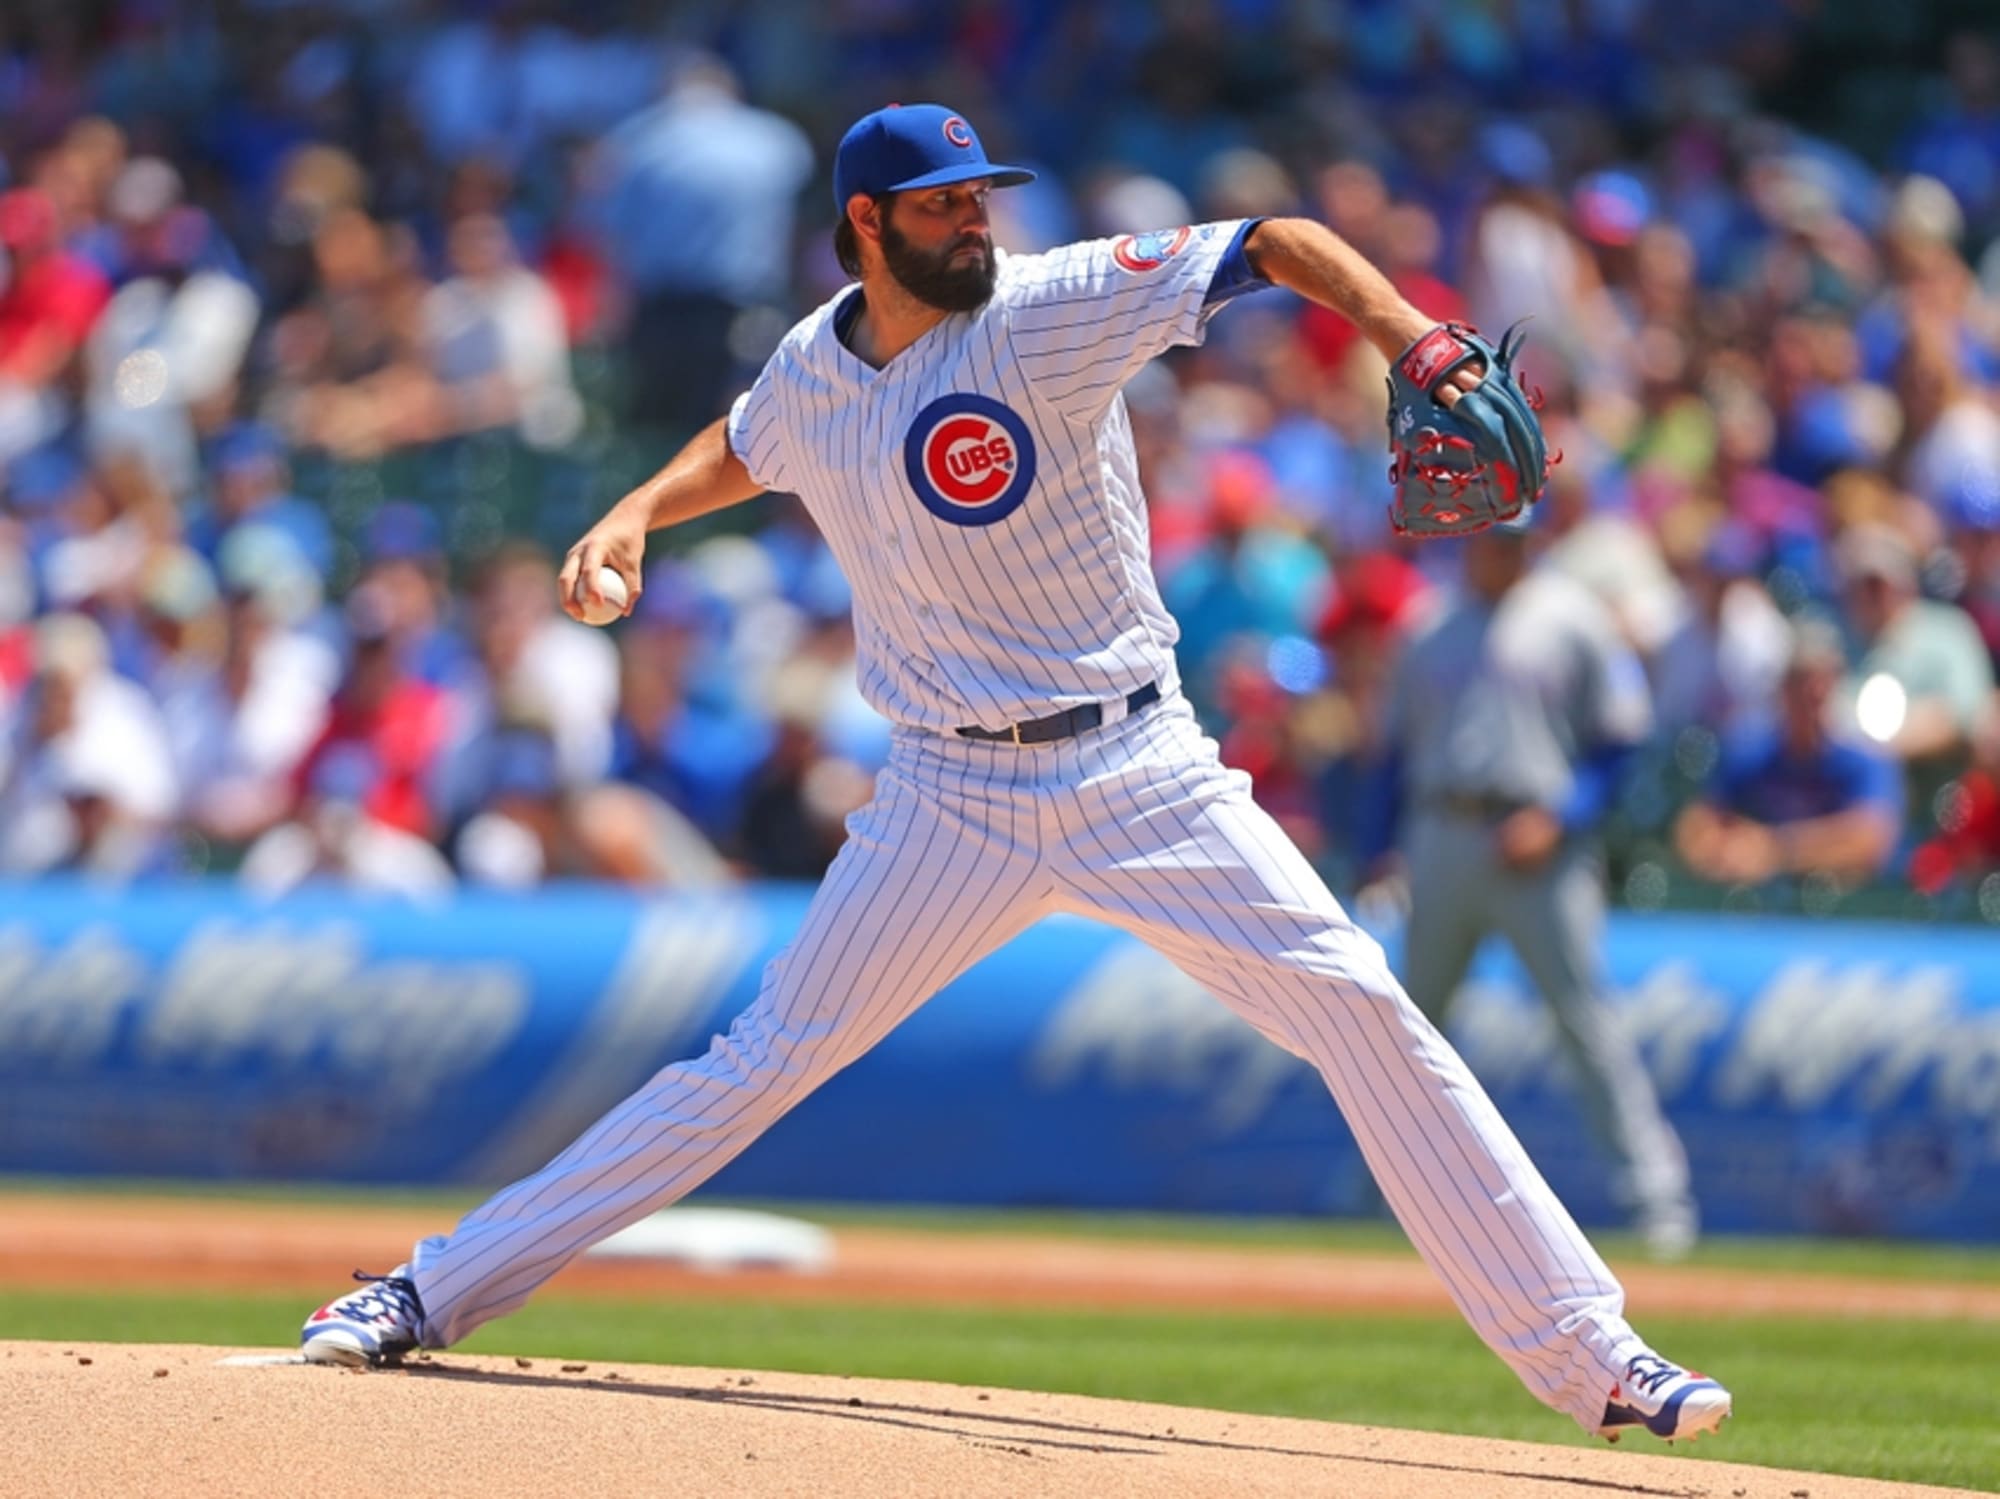 Chicago Cubs continue Crosstown Classic at Wrigley Field